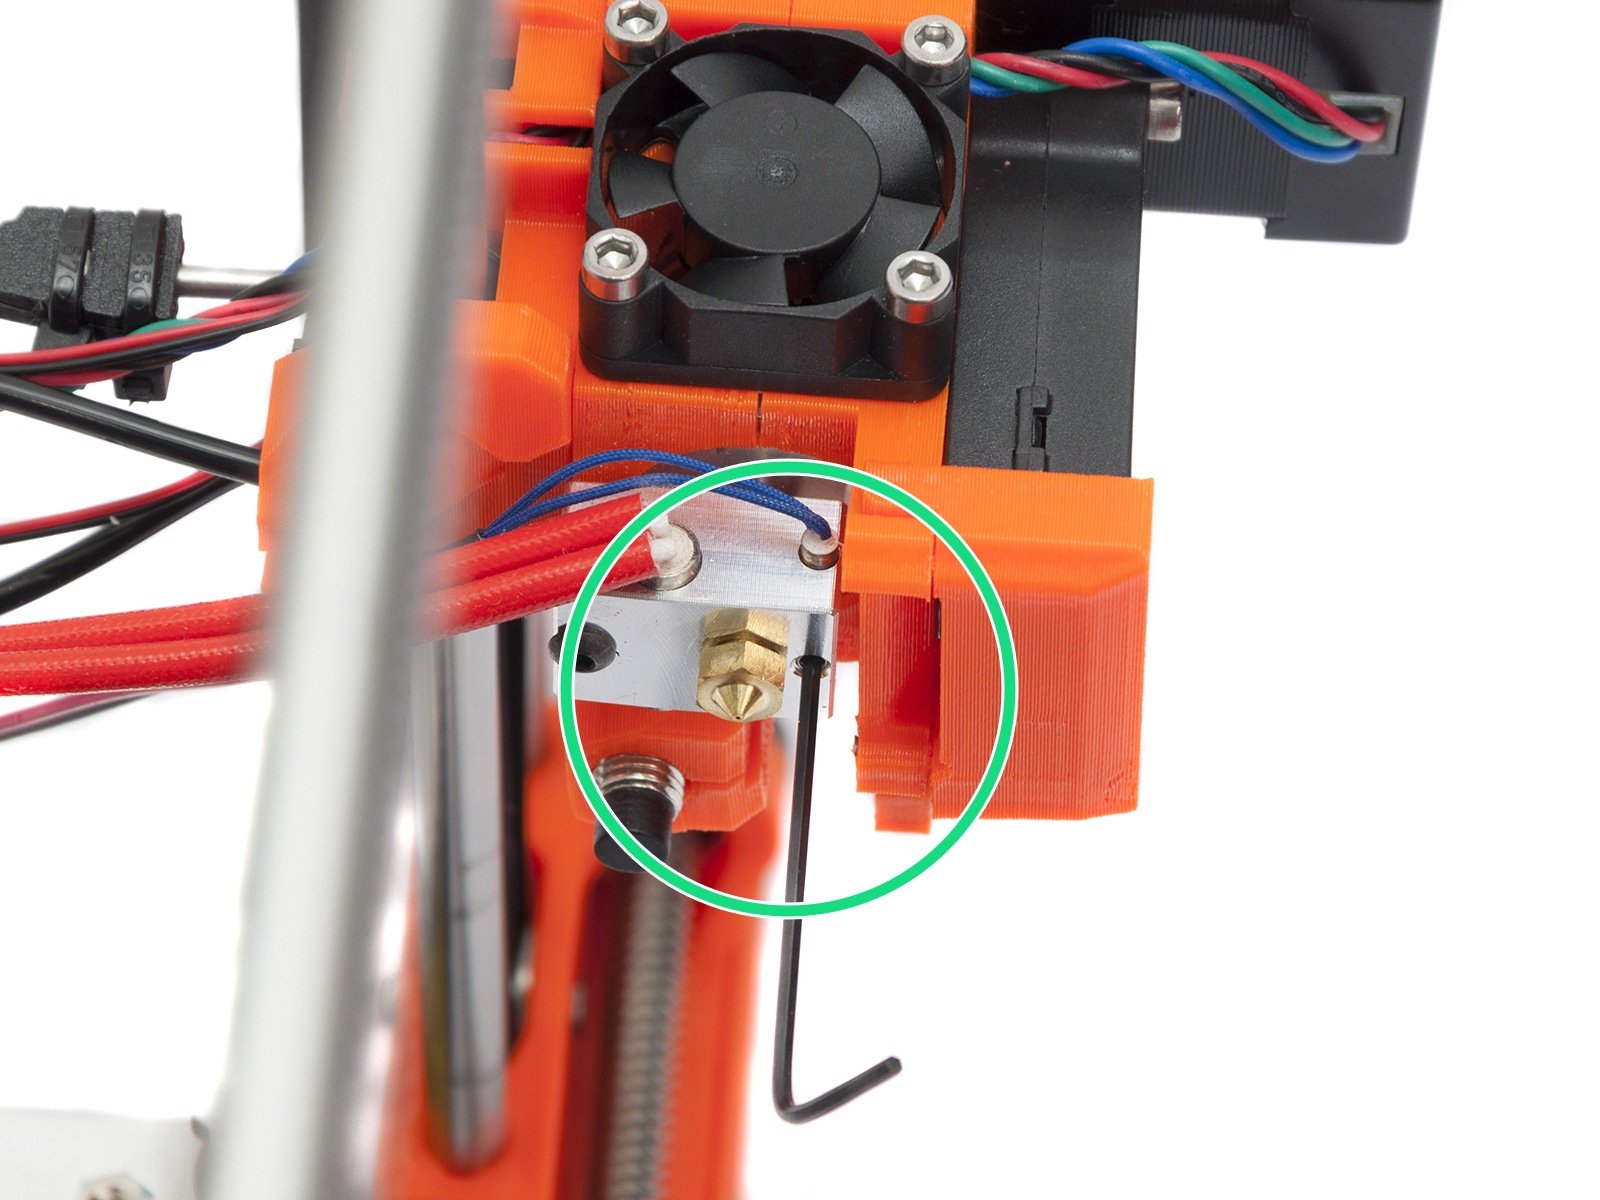 Removing old thermistor